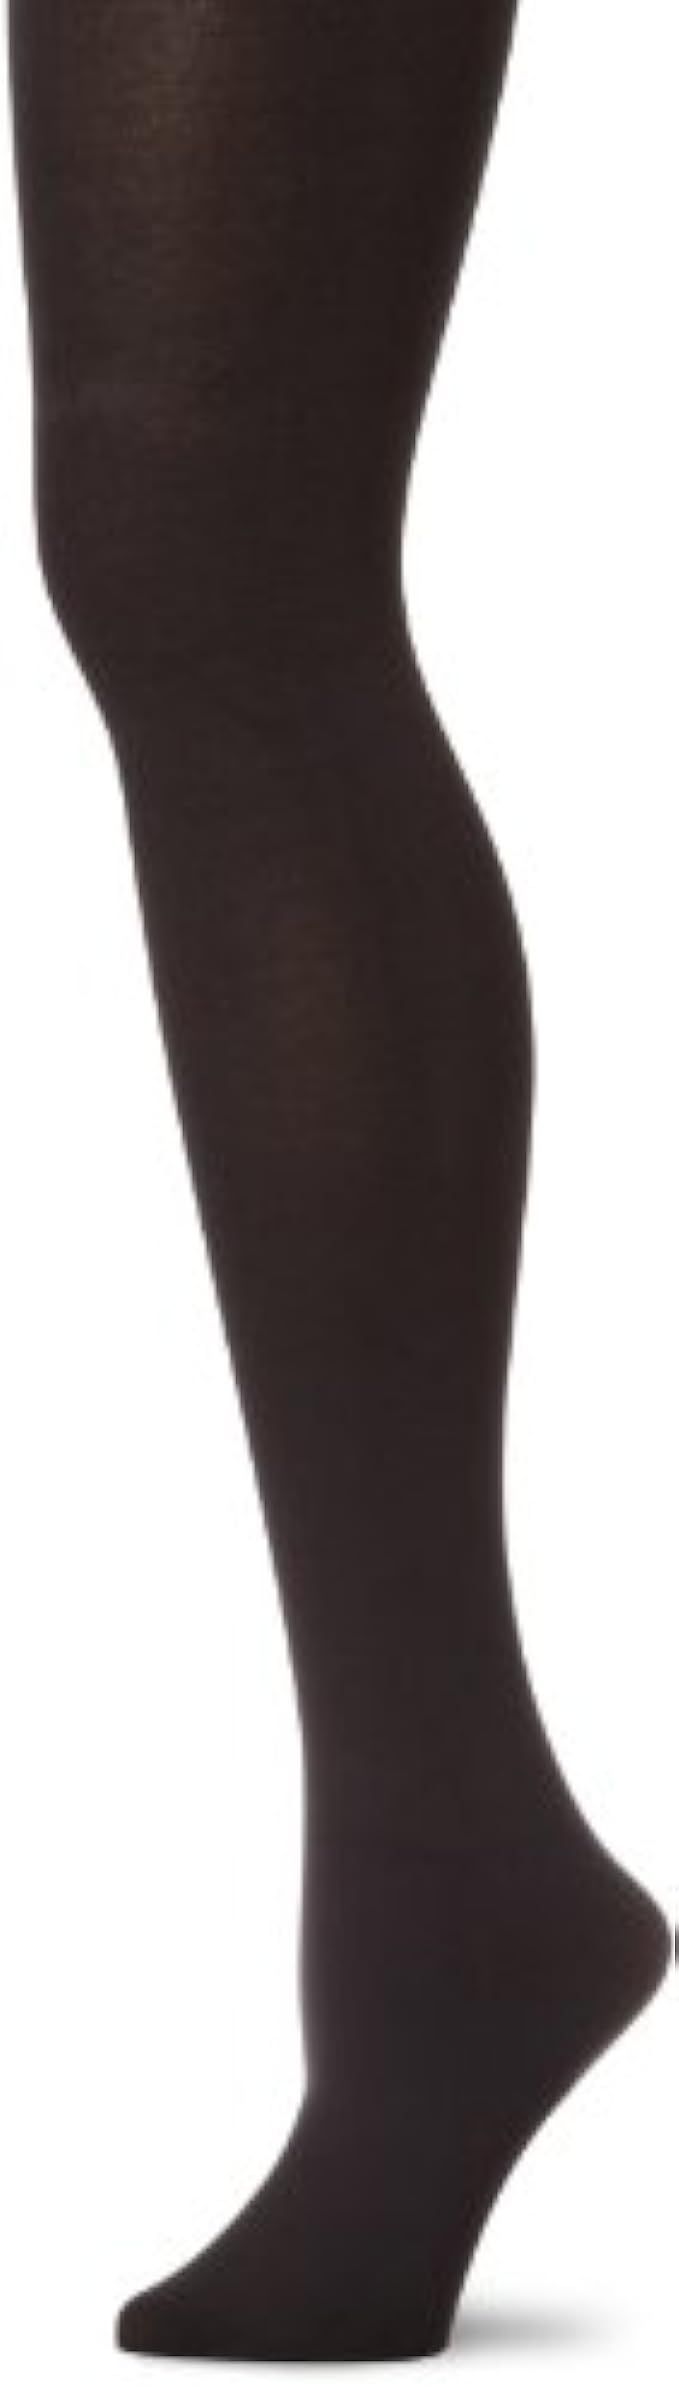 HUE Super Opaque Tights with Control Top | Amazon (US)